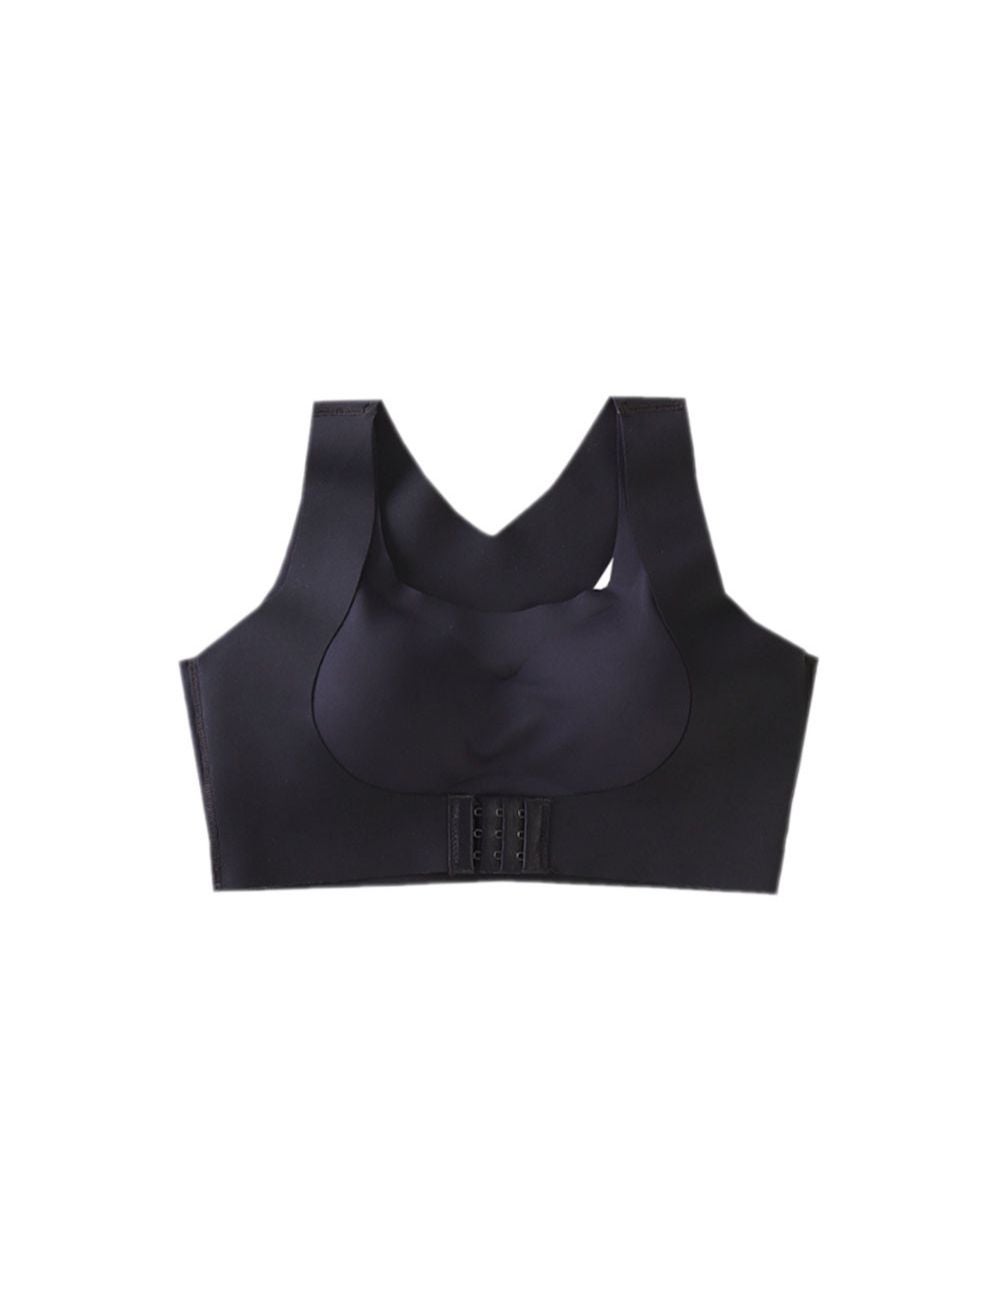 Front Buckle Support Bra - Black - Easy And Adjustable Front Buckle For ...